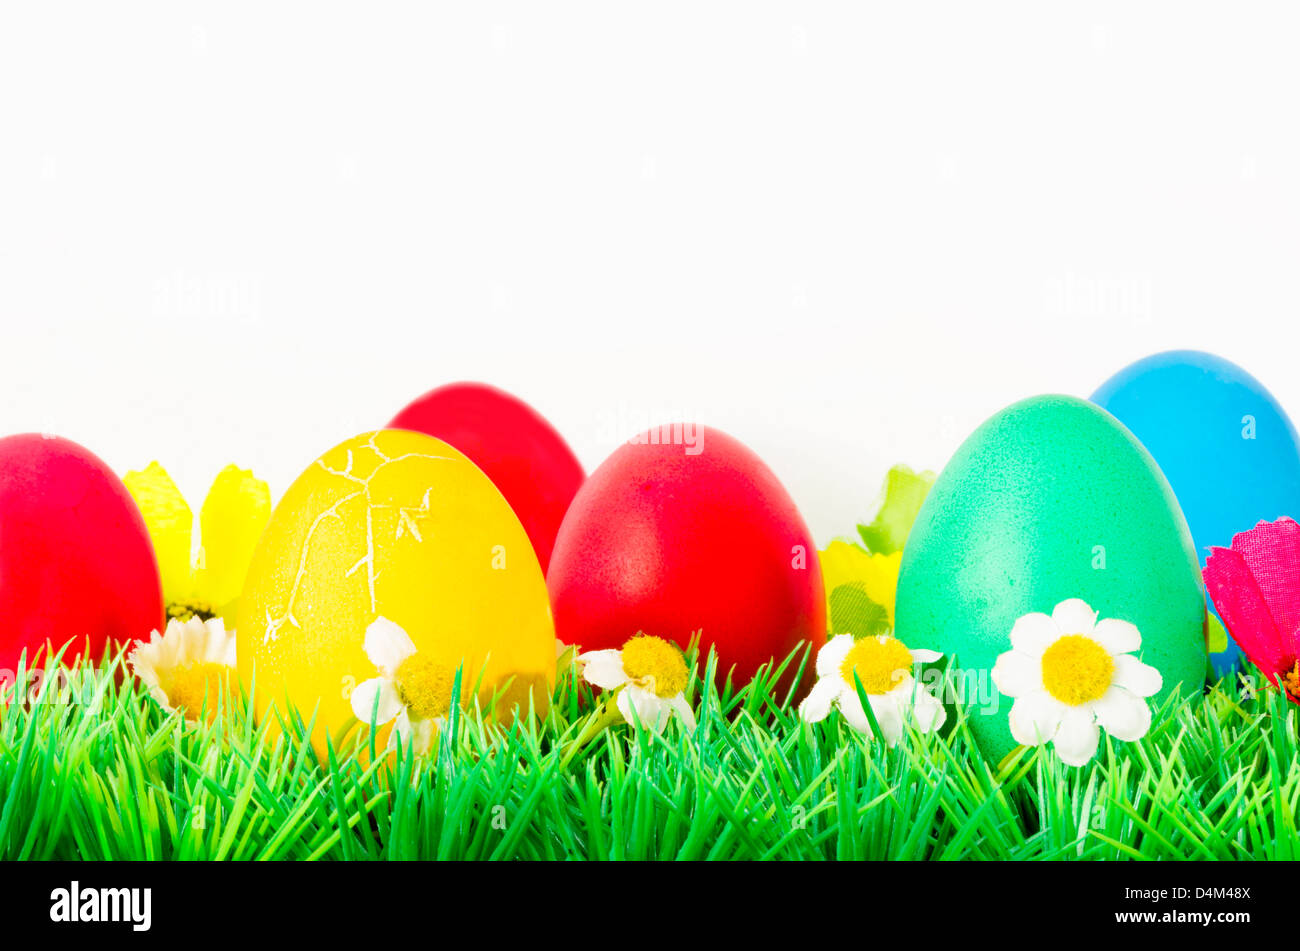 Easter Eggs on grass with flowers around Stock Photo